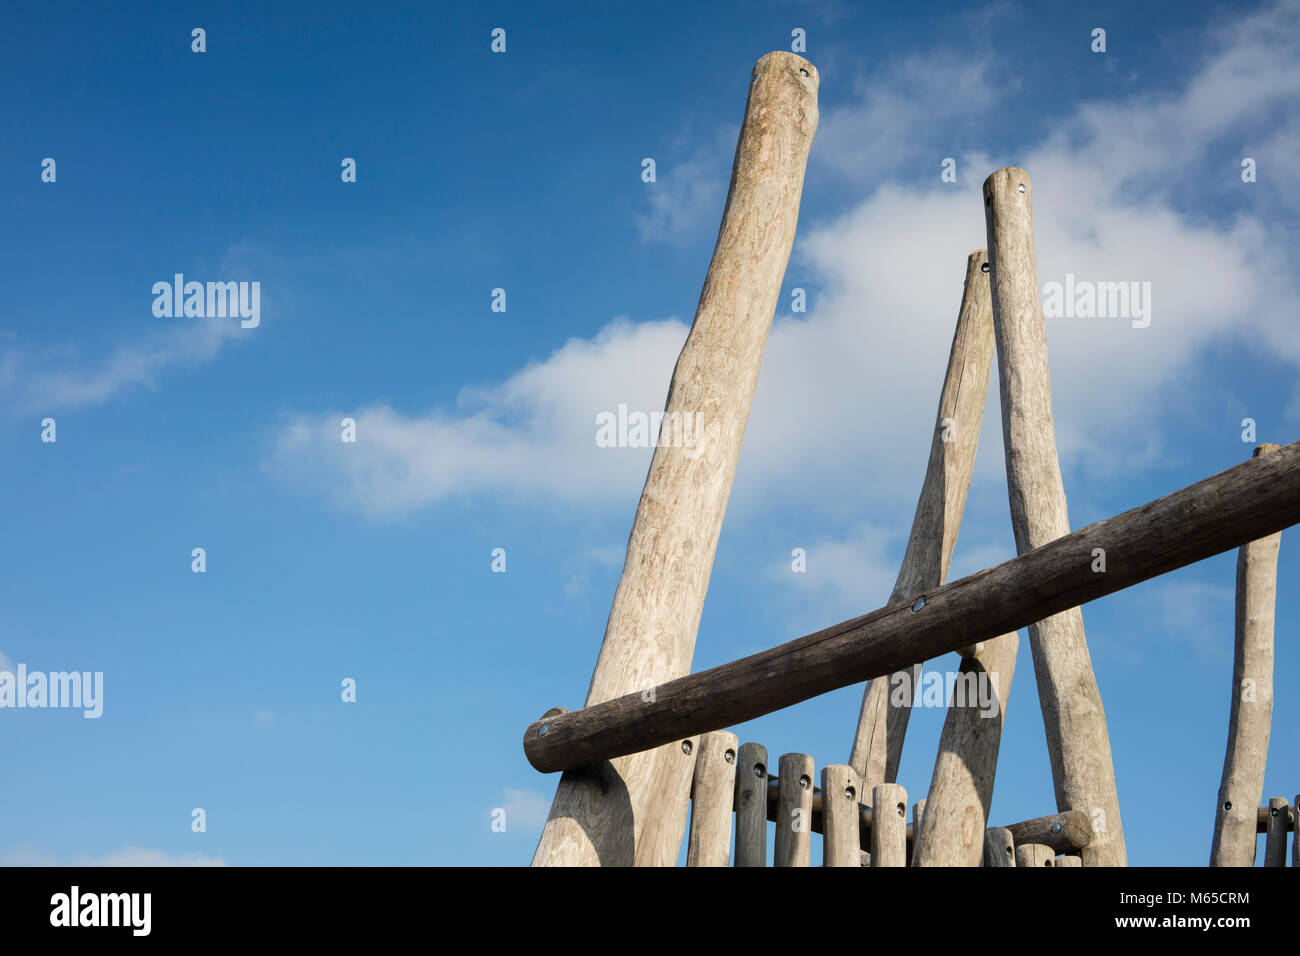 Detail of playground wooden structure in a sunny day Stock Photo